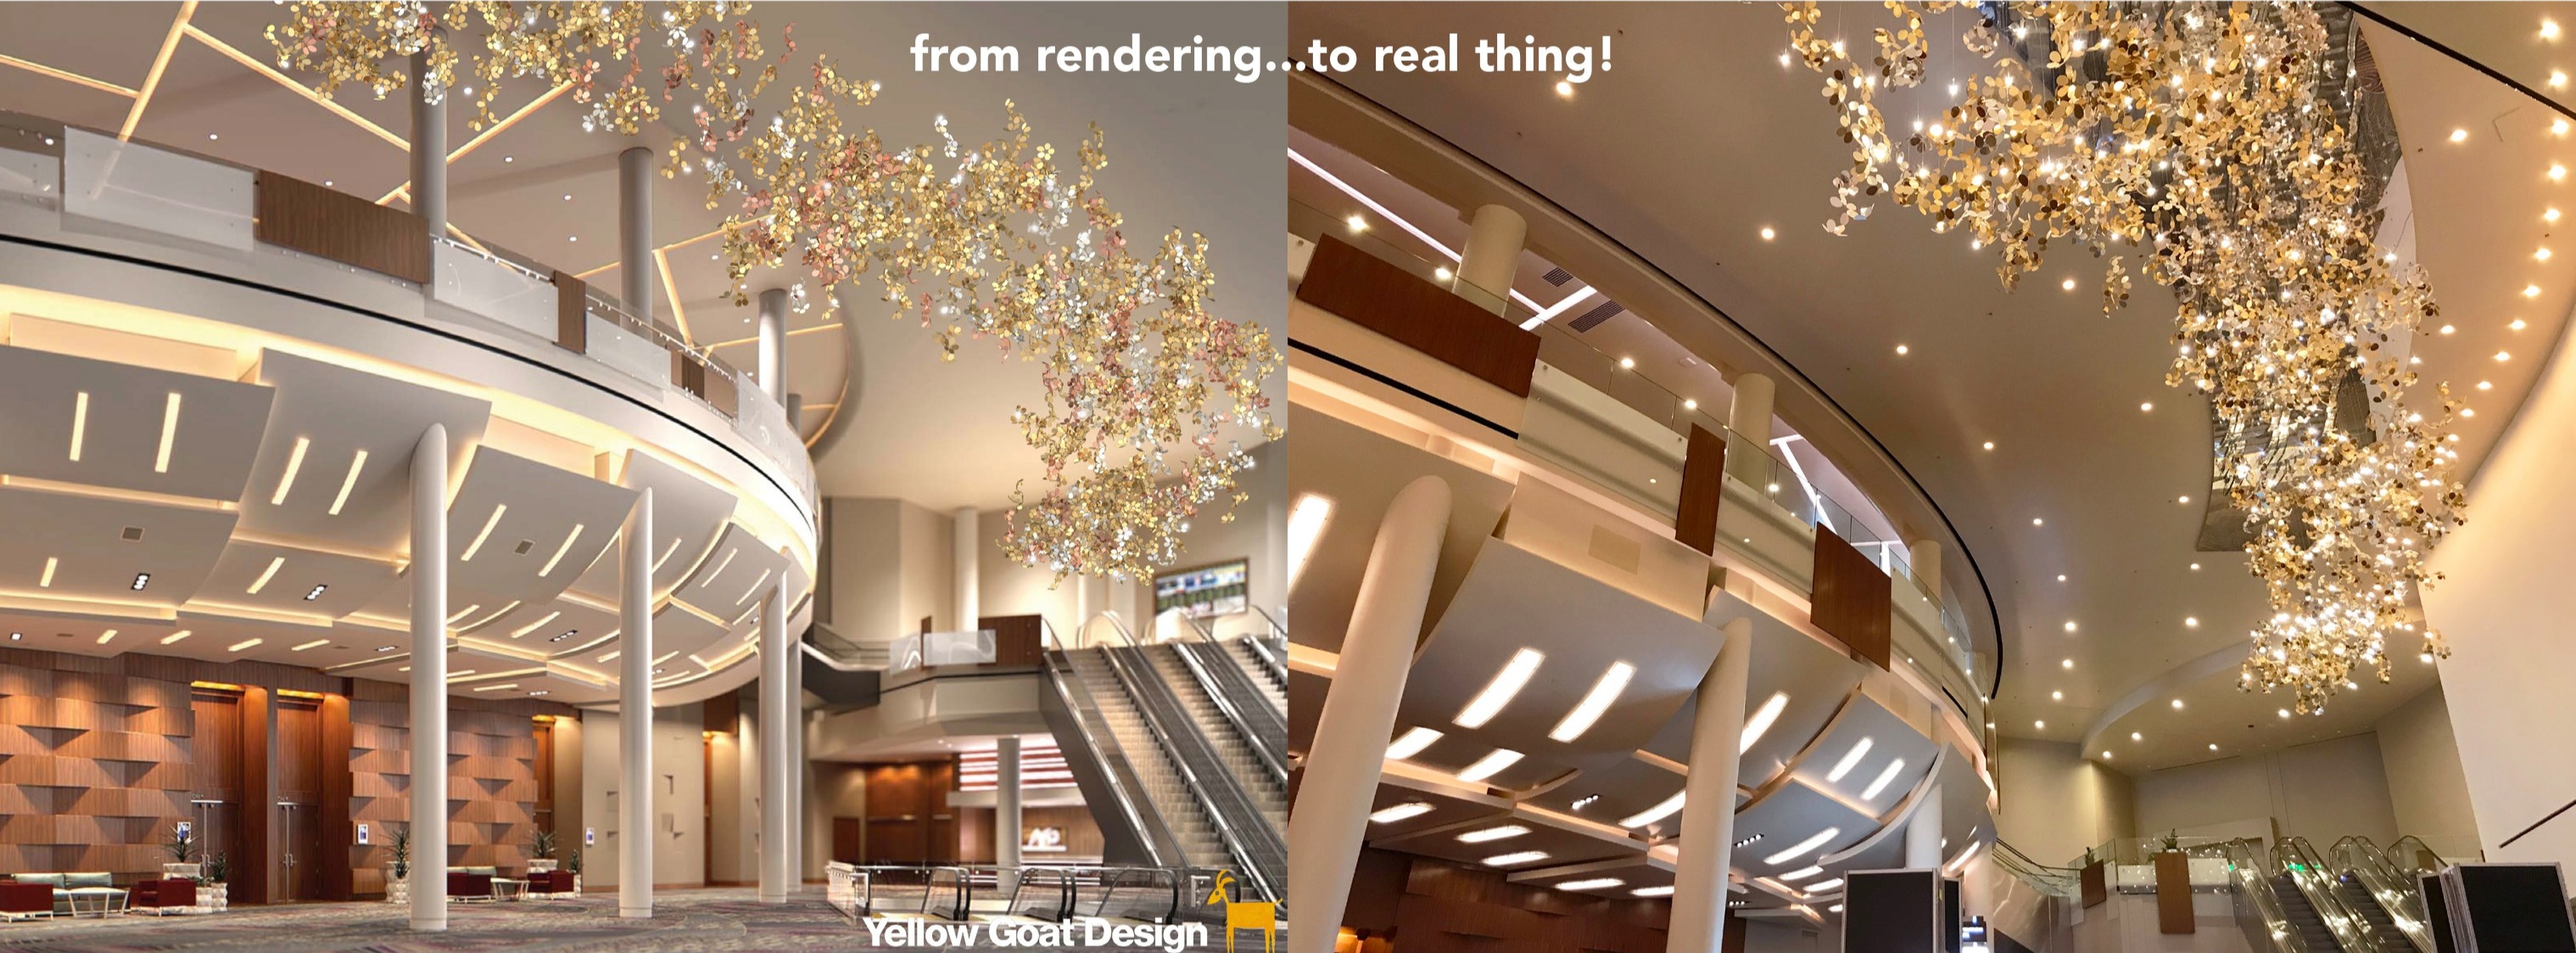 ygd_aria convention center_arboreal photo collage_render v real